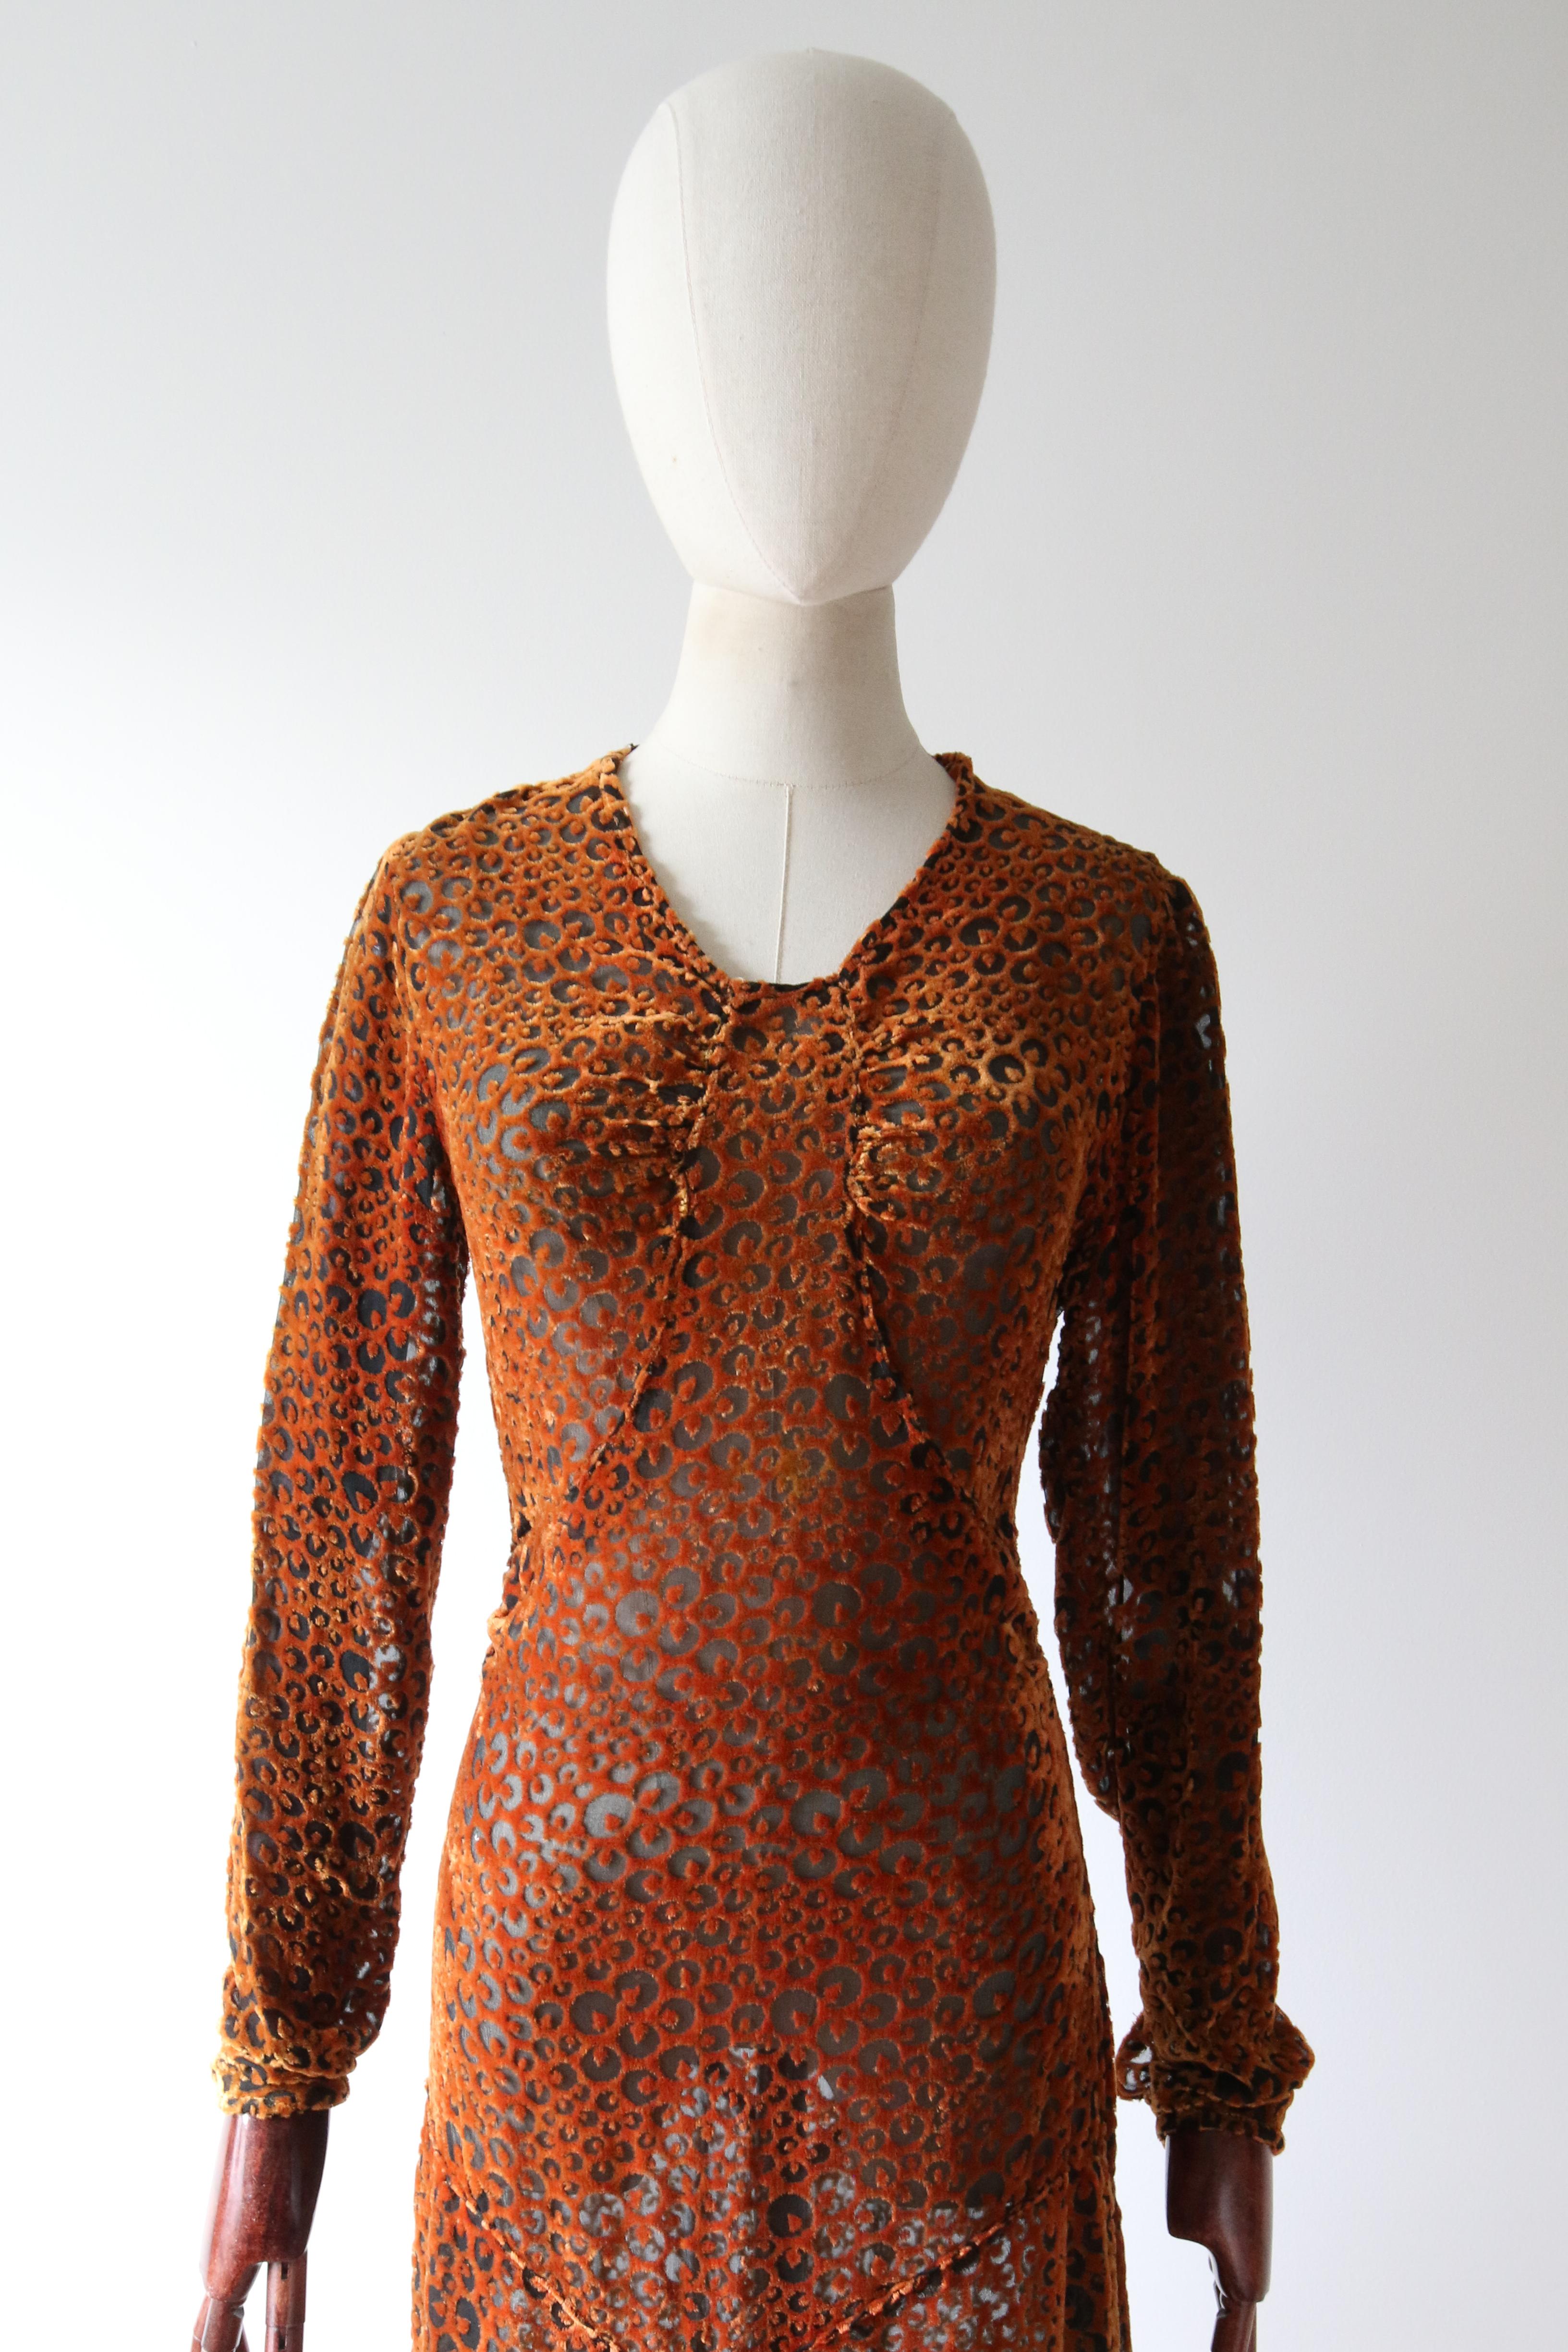 This breathtaking 1930's silk dress in a burnout devoré pattern in shades of amber and spice set against a black silk base, is a rare piece to behold. 

The rounded neckline is framed by a simple shoulder line and full length inset sleeves, edged